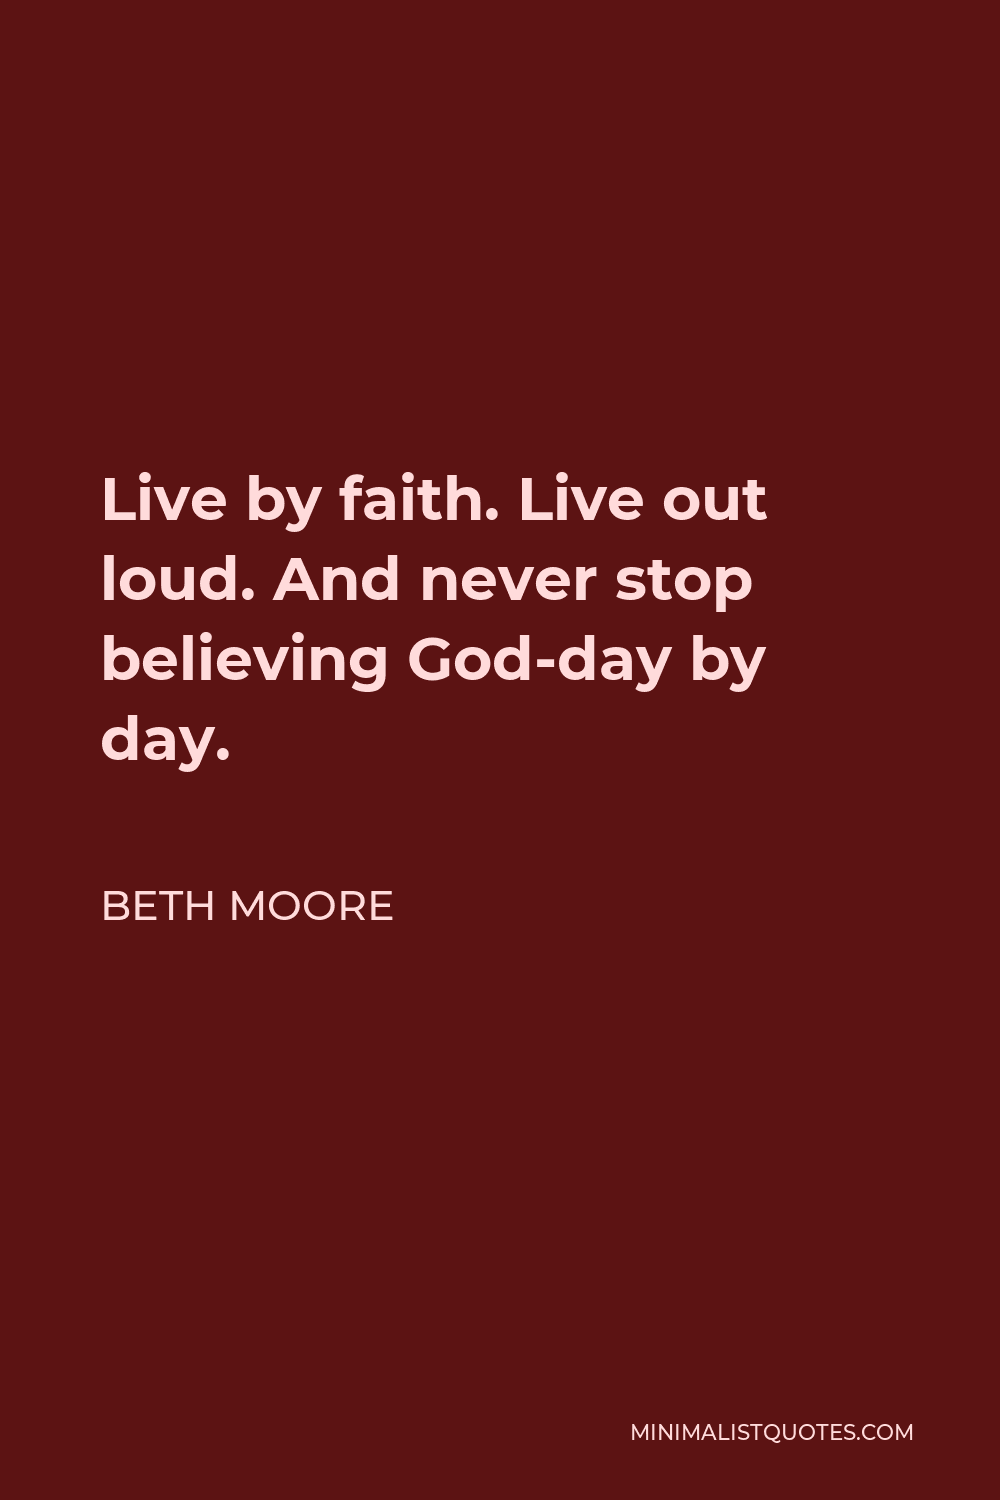 Beth Moore Quote - Live by faith. Live out loud. And never stop believing God-day by day.